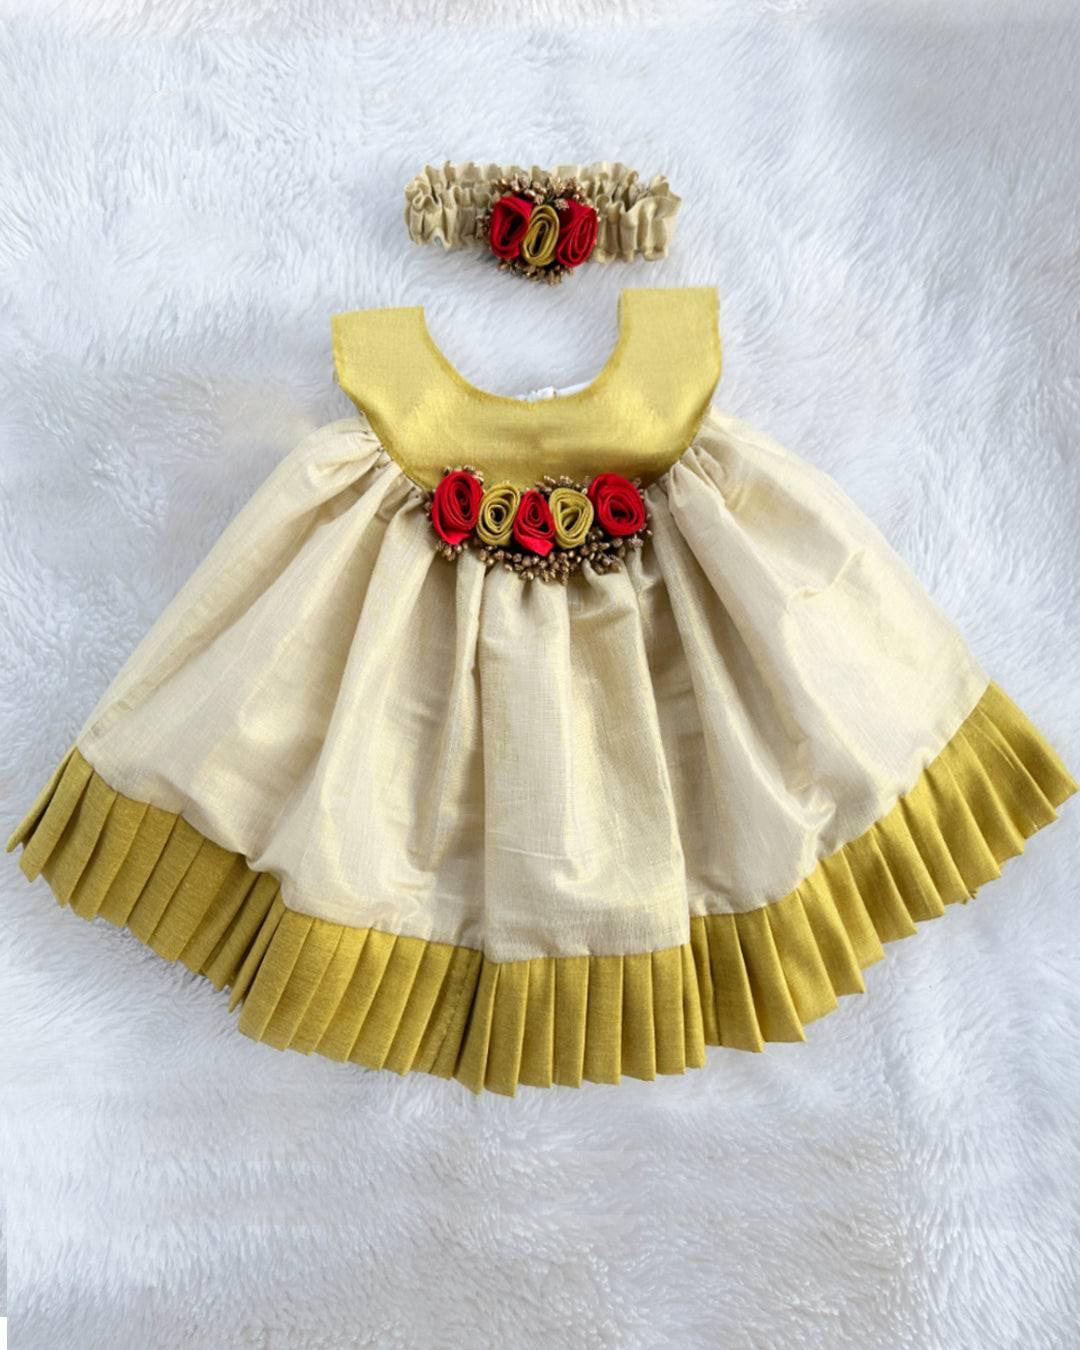 Cream & Gold Kerala Traditional Tissue frock - Matching Hairbad
Material: Cream shade kerala kasavu handloom fabric. Center portion is highlighted with red &amp; golden flowers with pollens attached. Beautifully designed outfit 